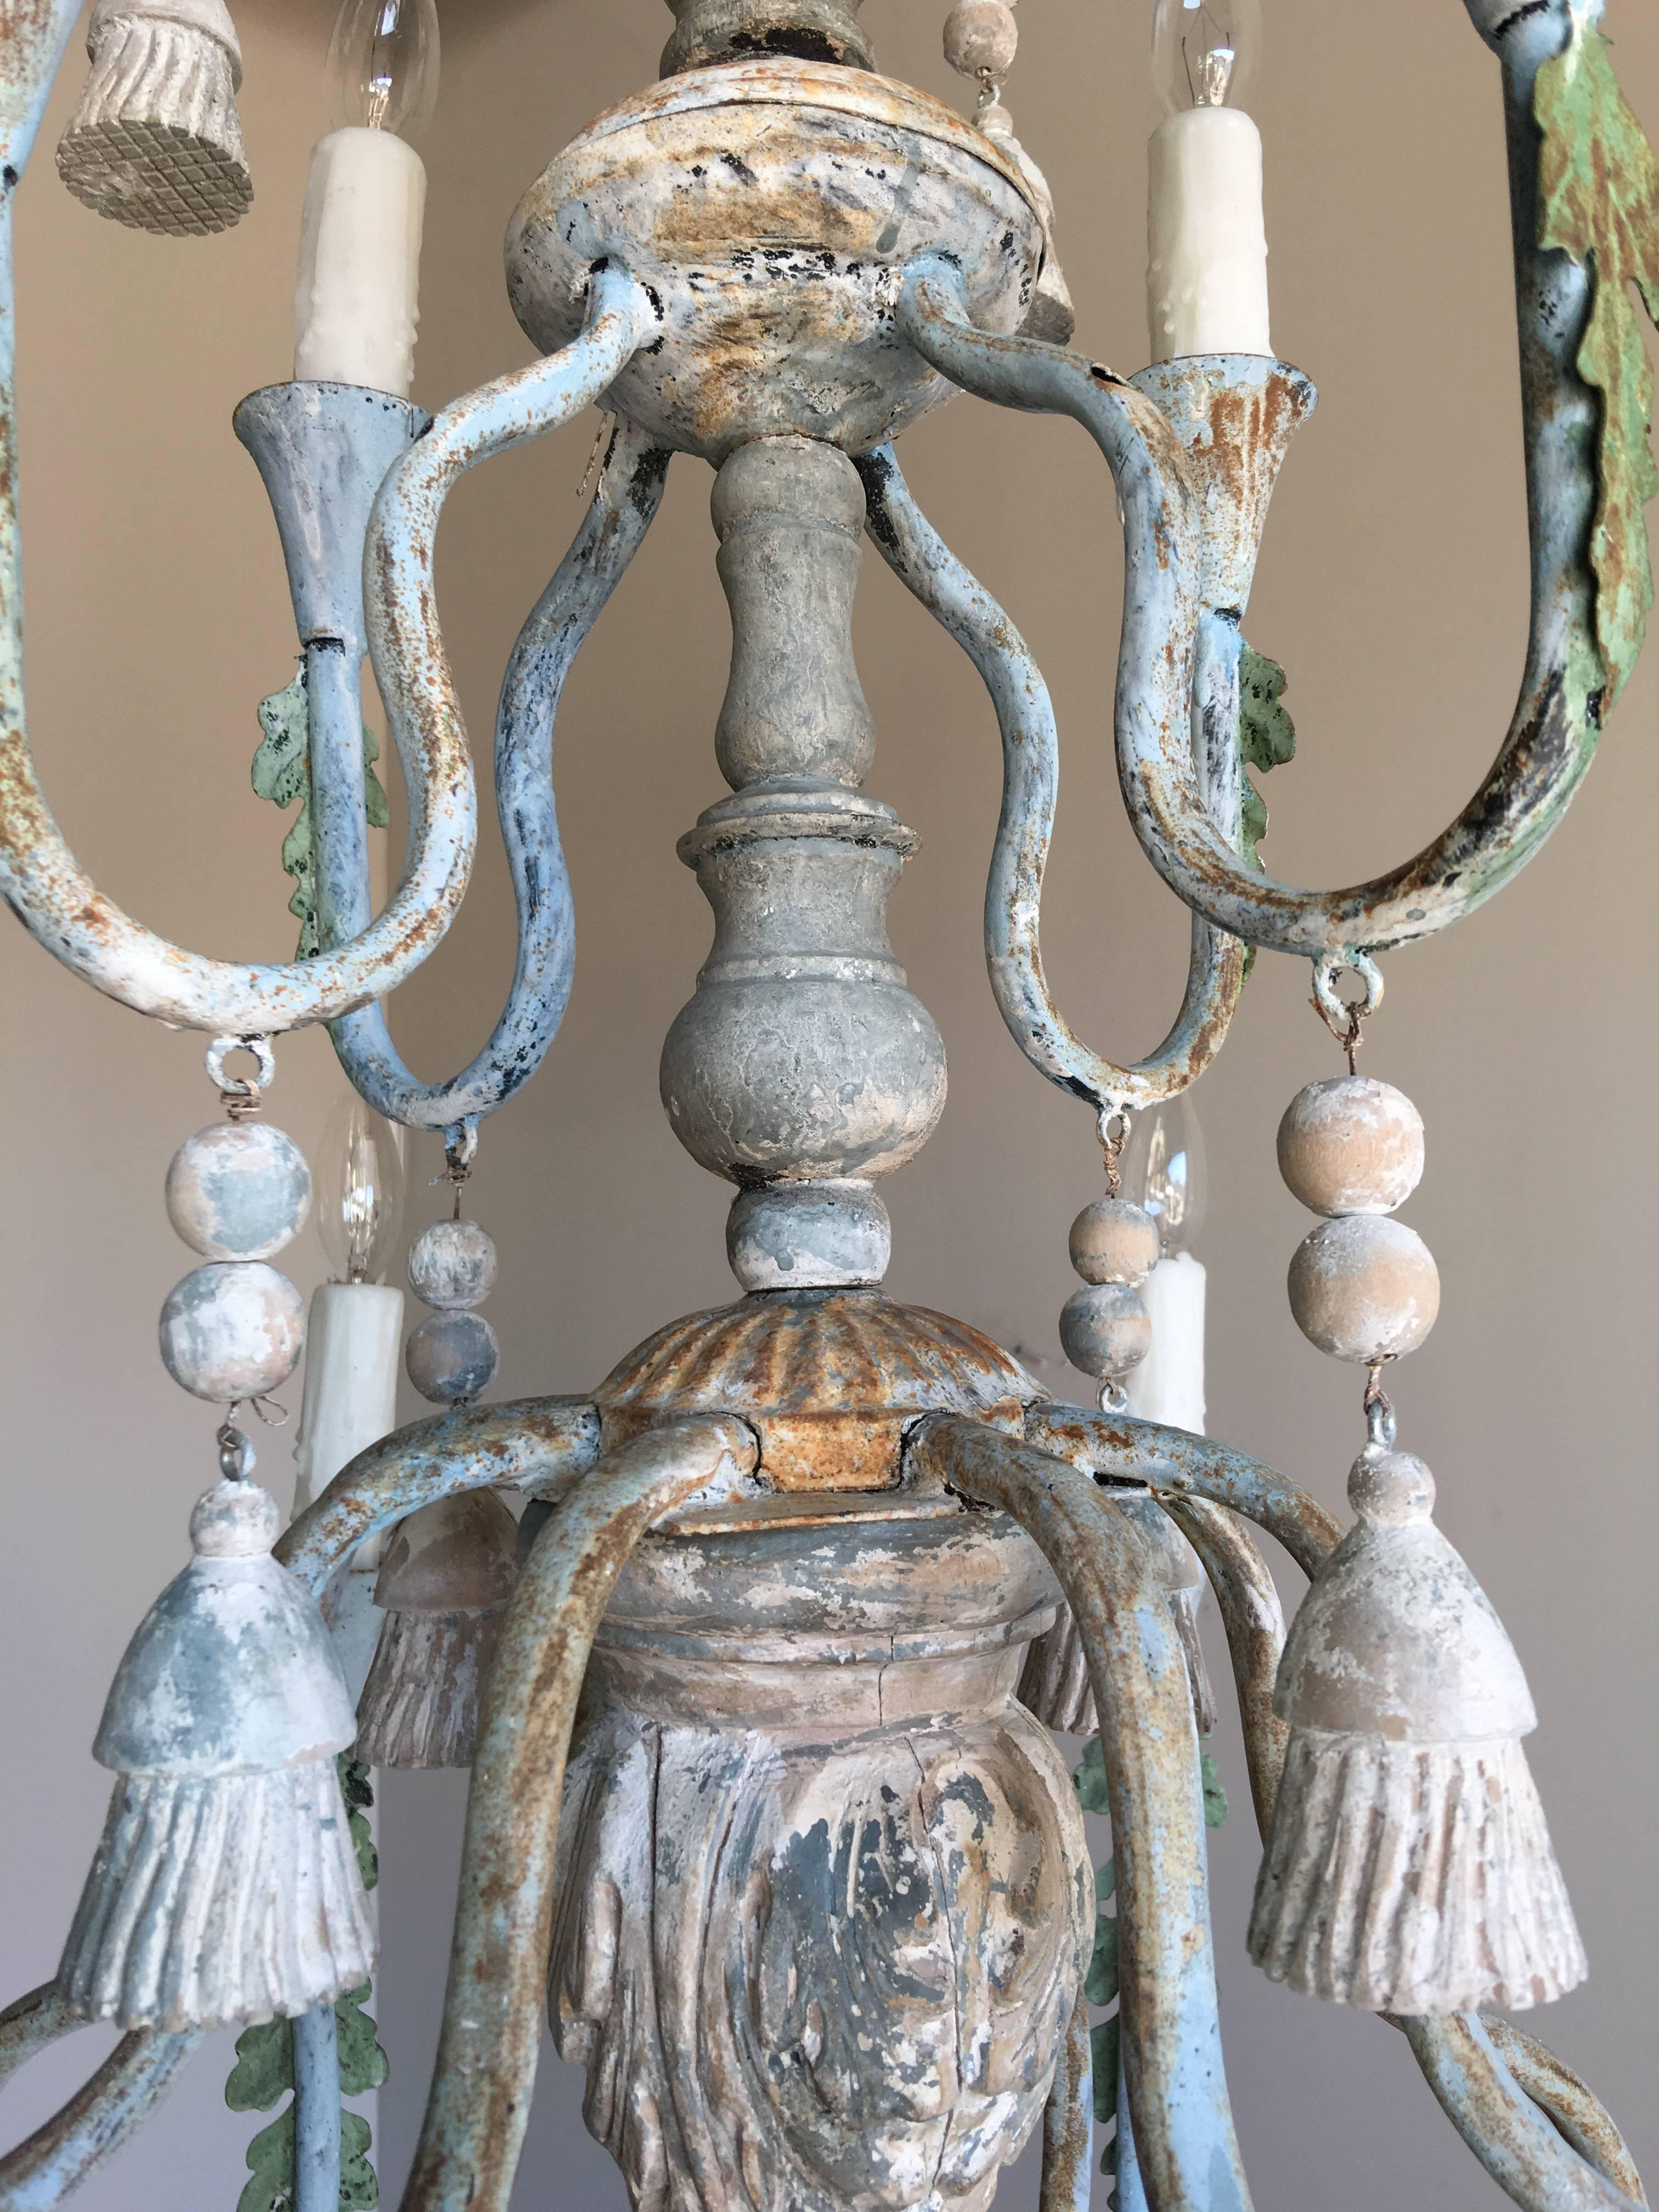 Mid-20th Century Italian Wood and Iron Chandelier with Tassels